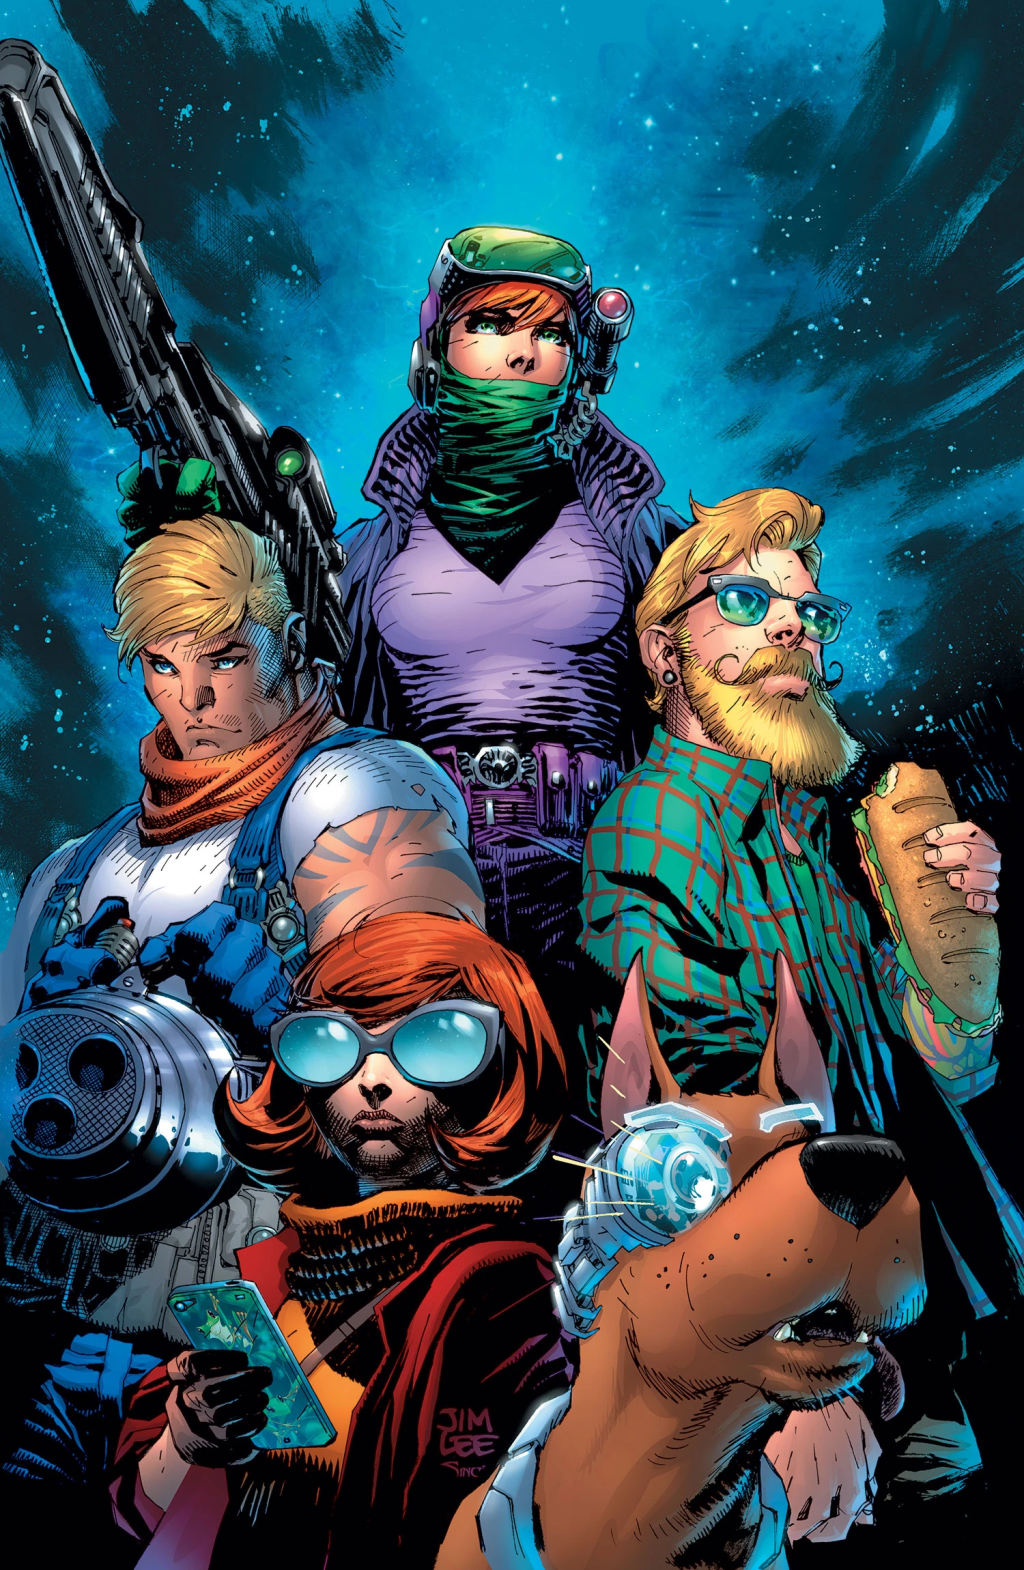 The Mystery Gang stands assembled on Jim Lee's variant cover to Scooby Apocalypse Vol. 1 #4 "Furs and Fangs!" (2016), DC